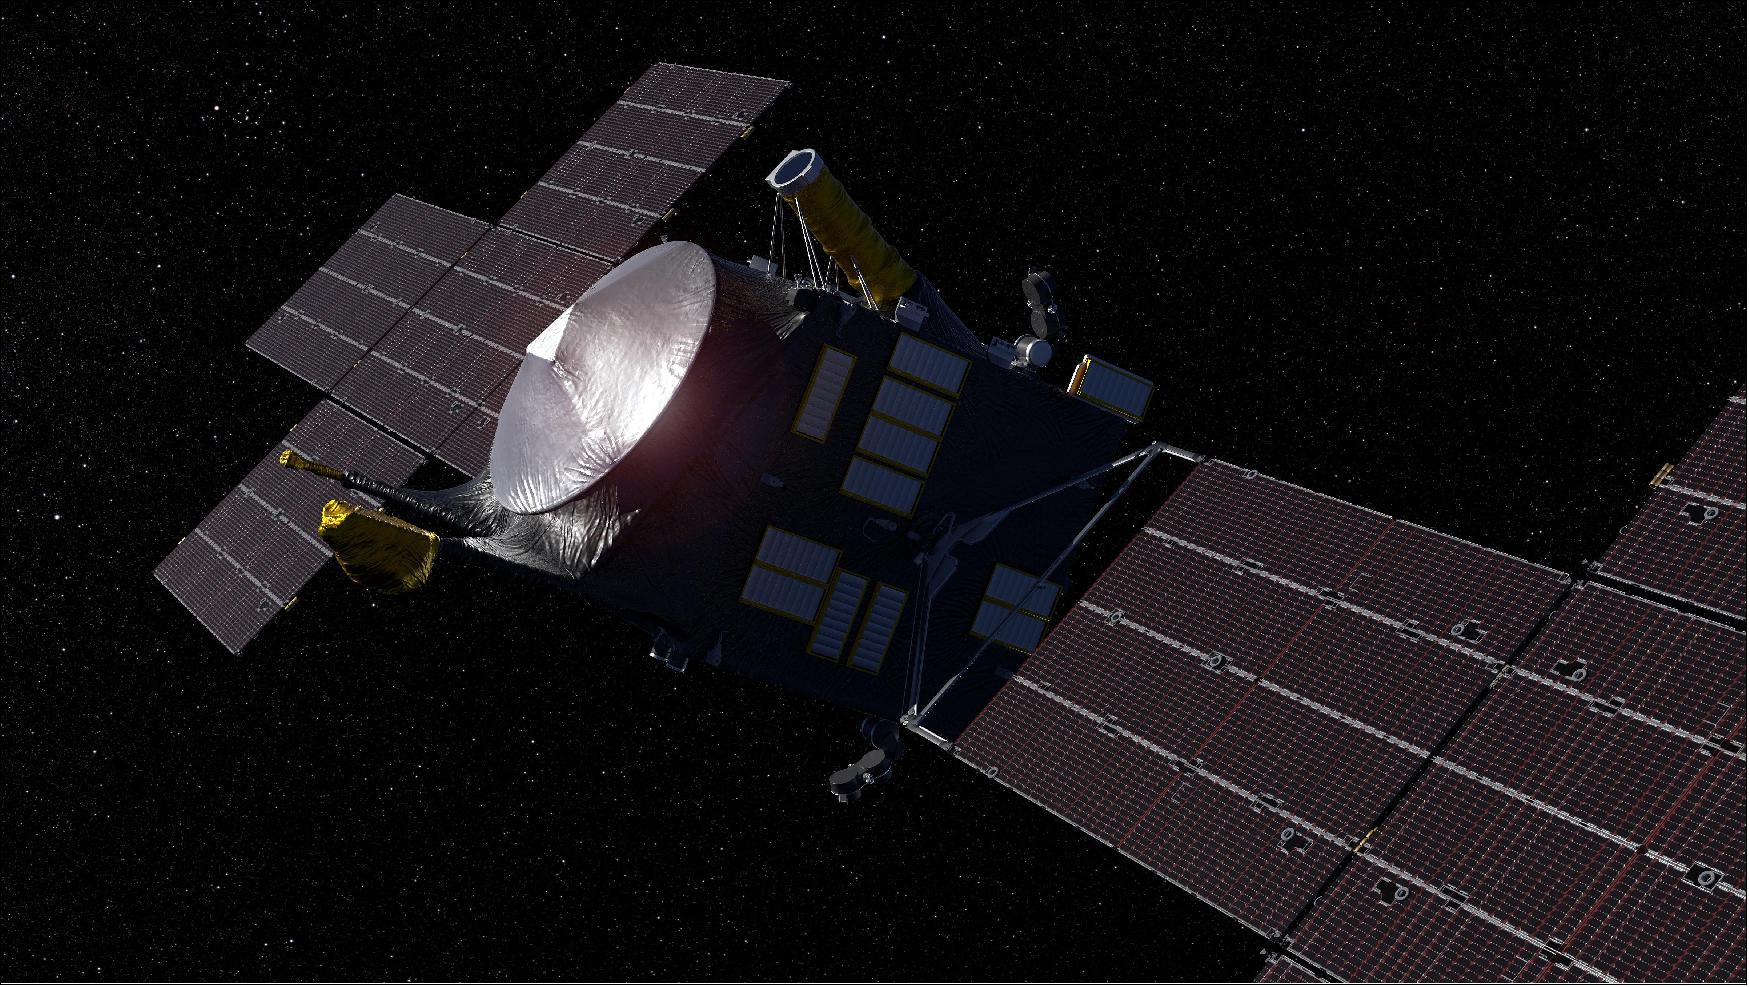 Figure 19: This artist's concept, updated as of June 2020, depicts NASA's Psyche spacecraft. Set to launch in August 2022, the Psyche mission will explore a metal-rich asteroid of the same name that lies in the main asteroid belt between Mars and Jupiter. The spacecraft will arrive in early 2026 and orbit the asteroid for nearly two years to investigate its composition (image credit: NASA/JPL-Caltech, Peter Rubin)